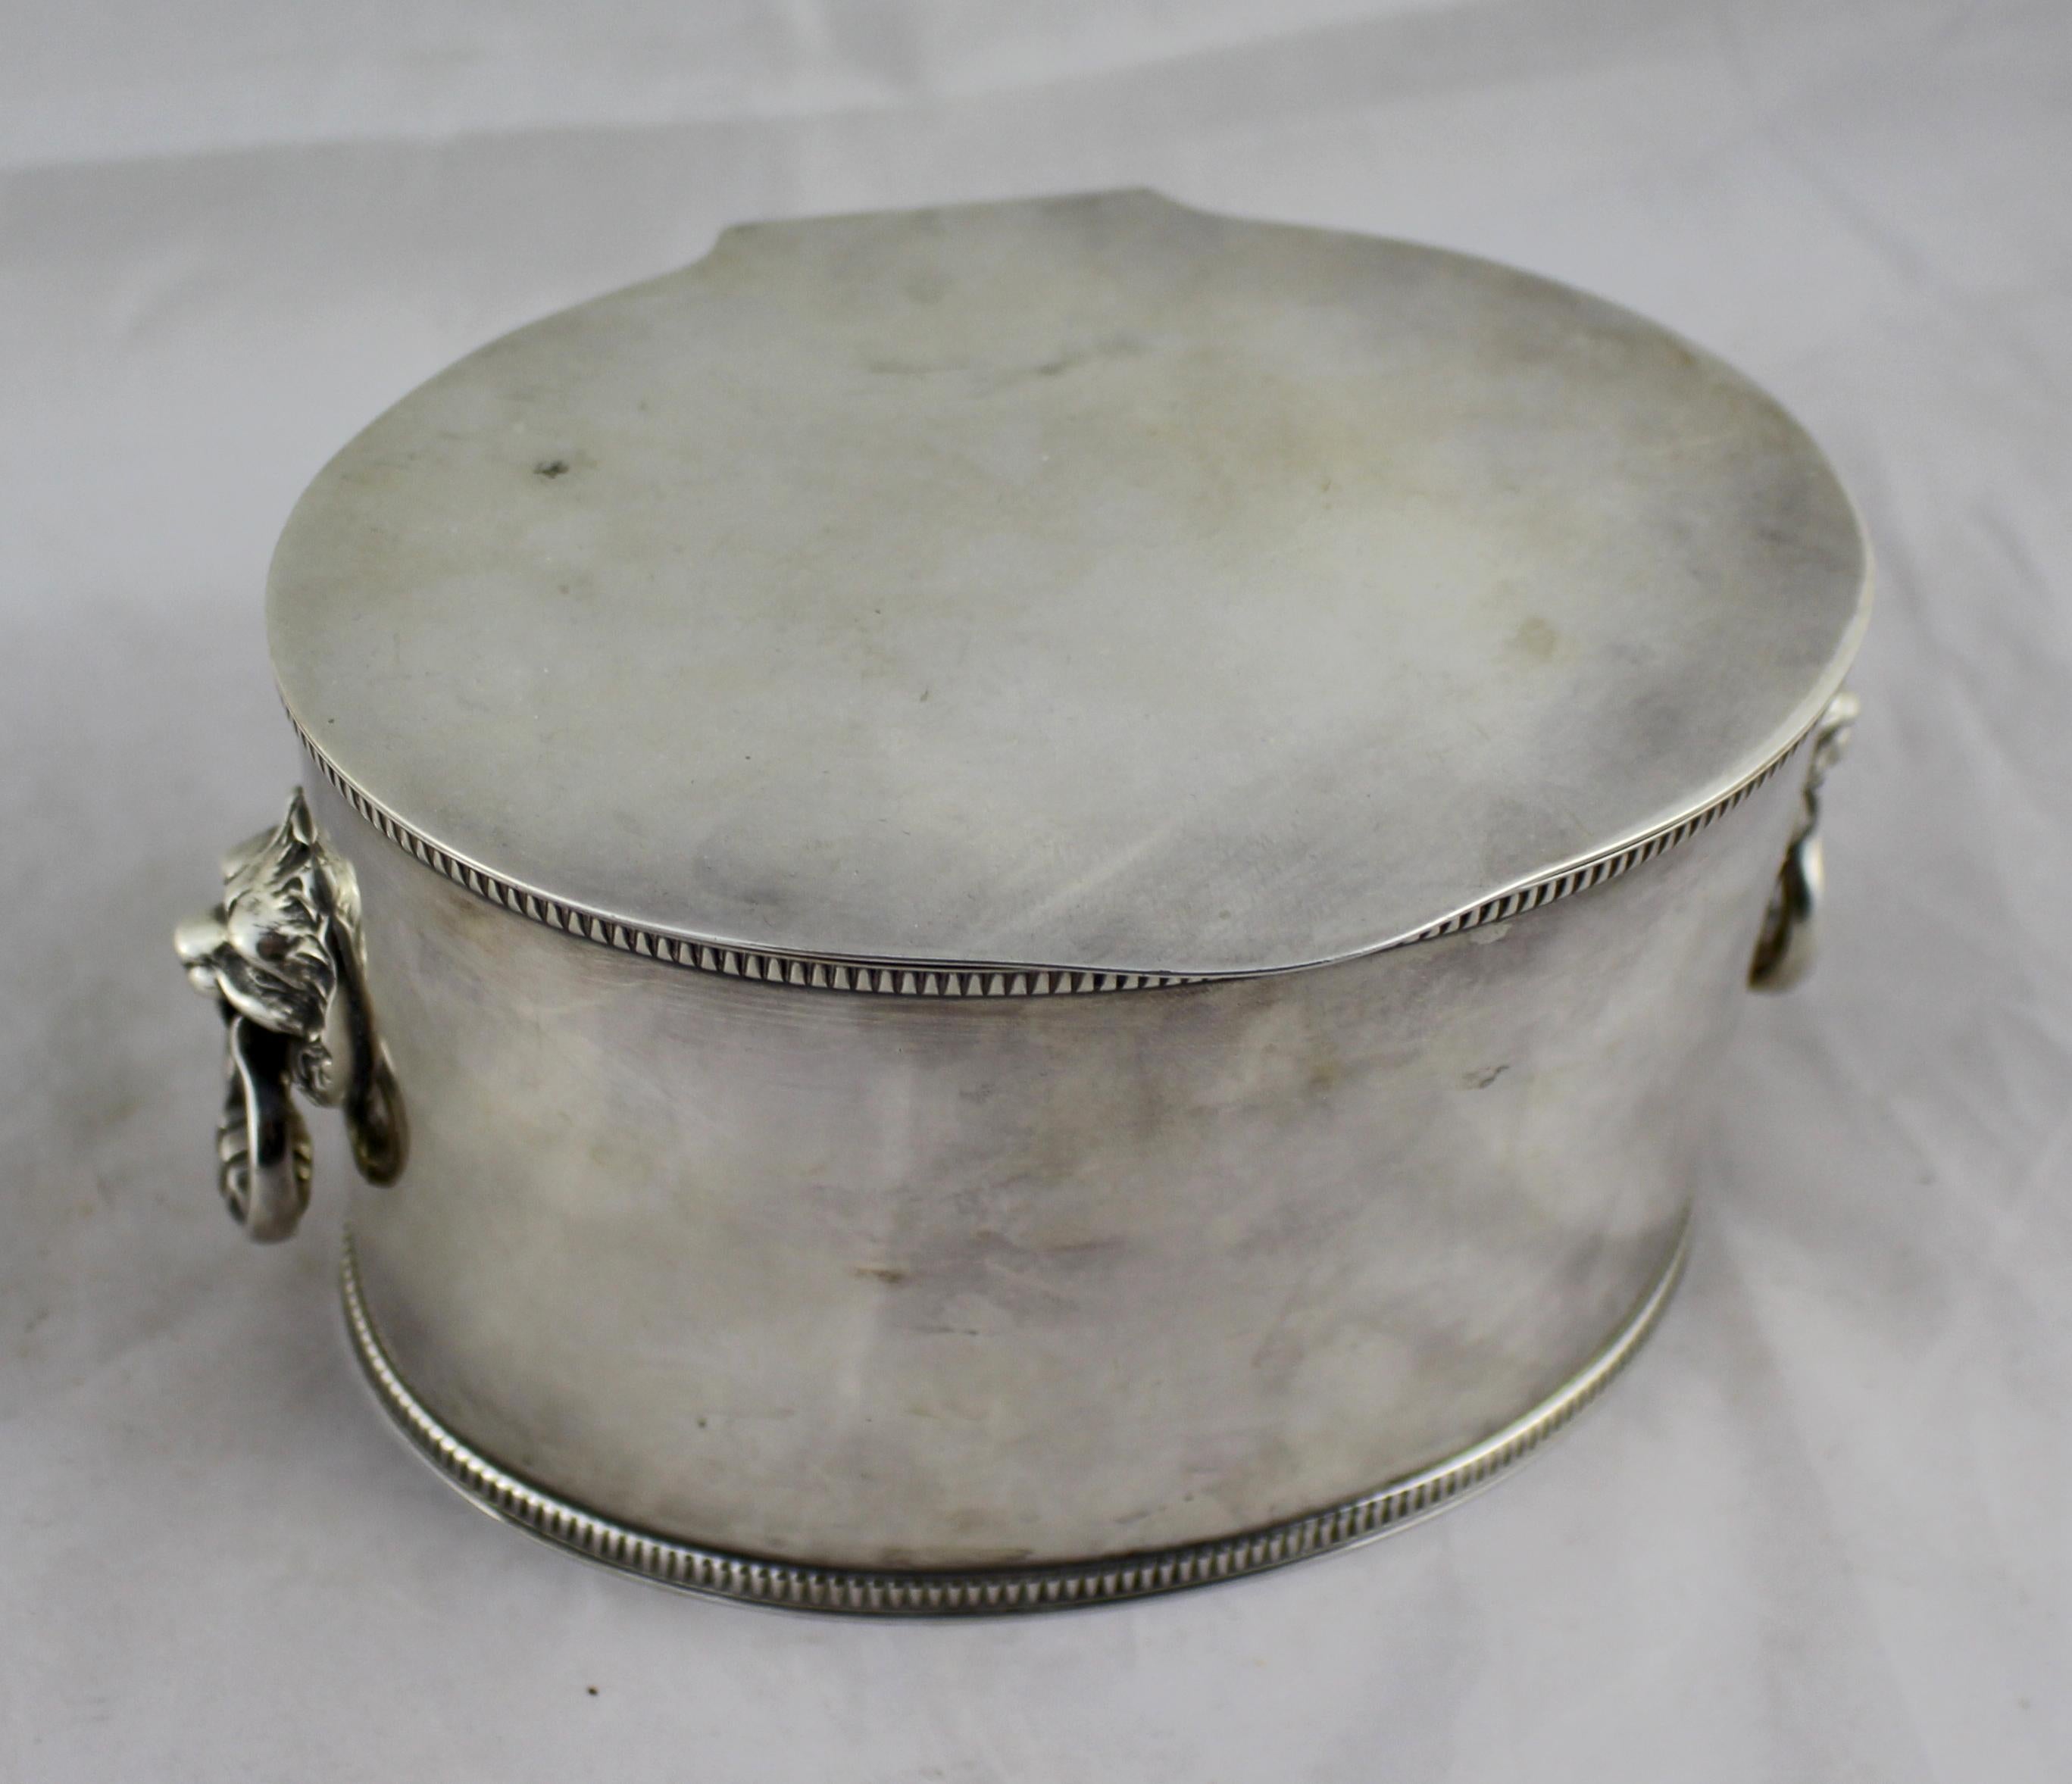 Period Victorian
Composition silver plated, EP
Measures: Width 19 cm / 7 1/2 in
Depth 13 cm / 5 in
Height 10 cm / 4 in.
Hallmark EP hallmark to the underside
Condition: Vey good condition commensurate with age. Fully hallmarked




Very